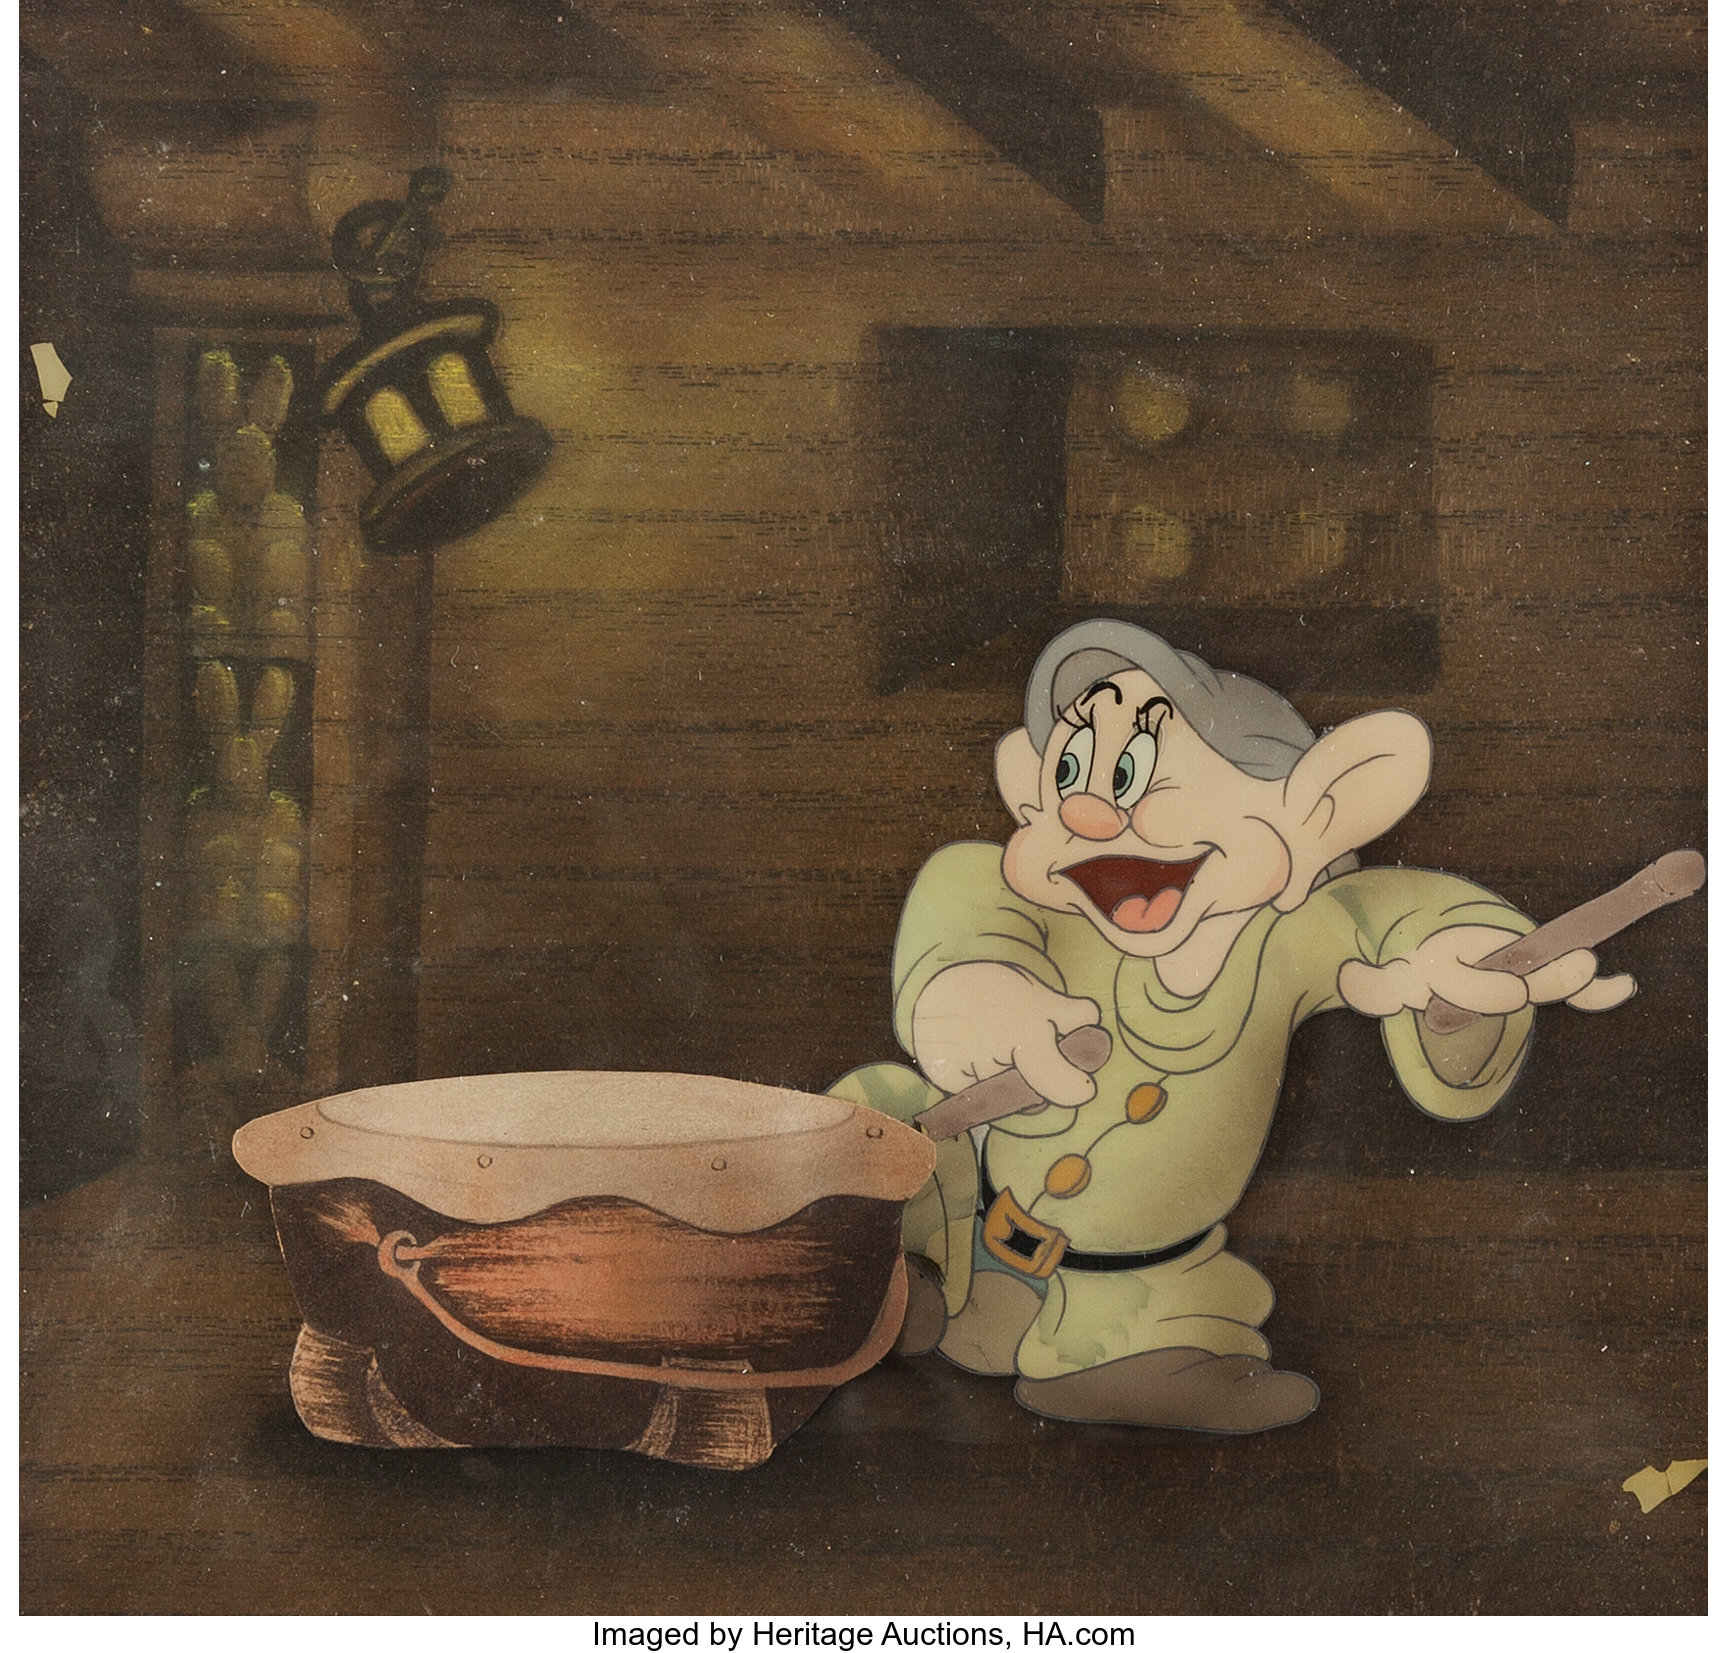 Snow White And The Seven Dwarfs Dopey Production Cel Courvoisier Lot 98502 Heritage Auctions 